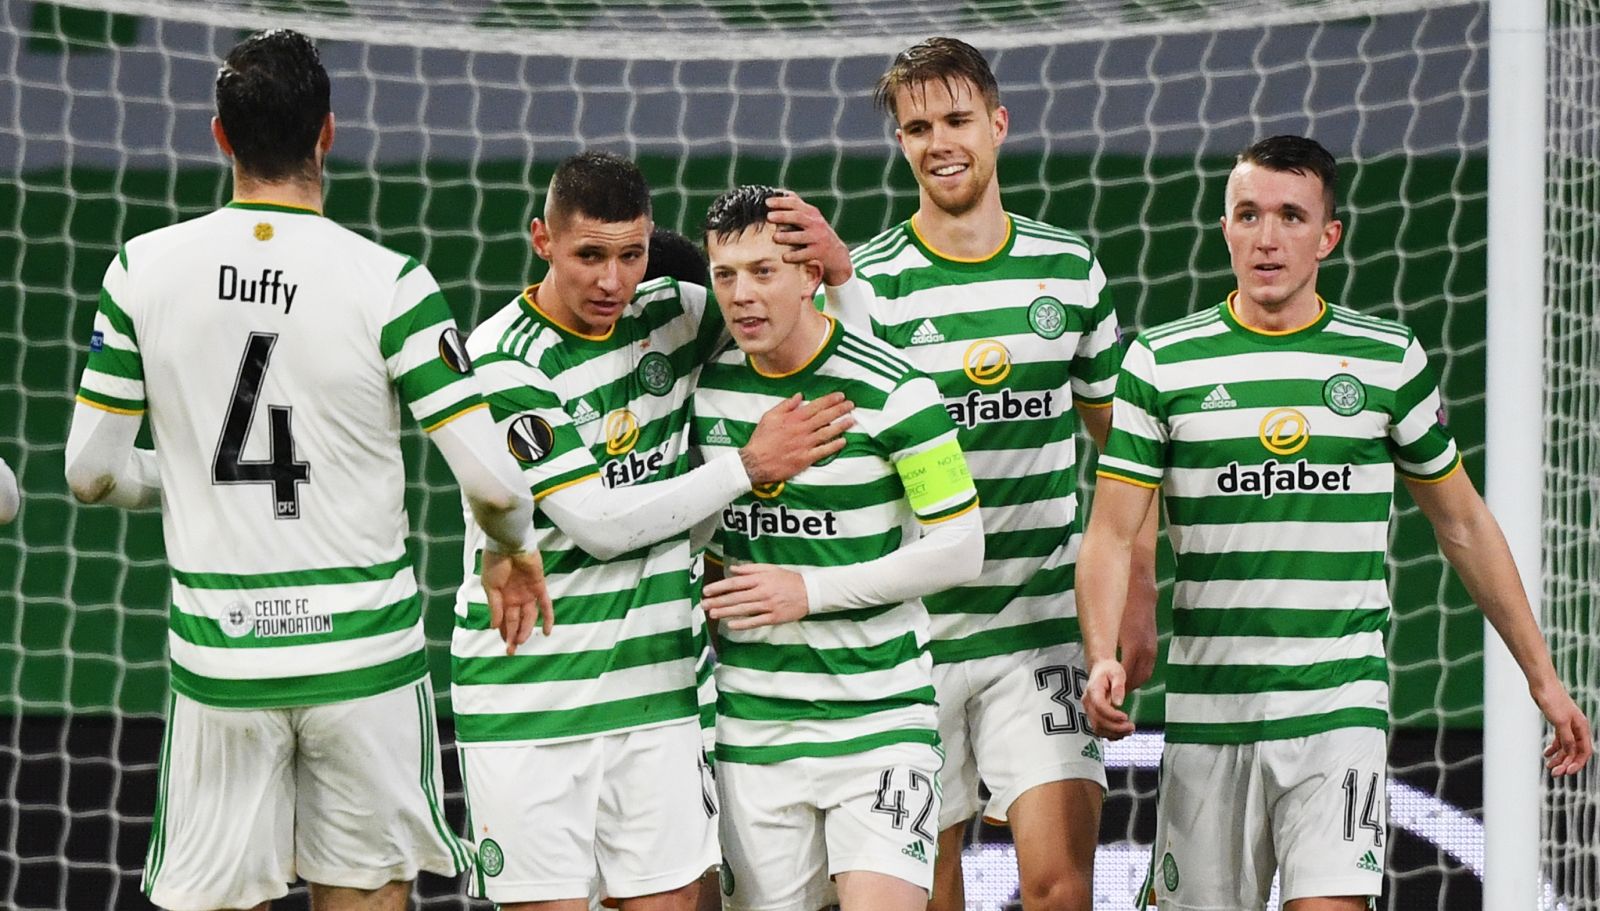 epa08876046 Celtic captain Callum McGregor (C) is celebrated by teammates after scoring with a penalty during the UEFA Europa League group H soccer match between Celtic Glasgow vs OSC Lille in Glasgow, Britain, 10 December 2020.  EPA/Andy Buchanan / POOL